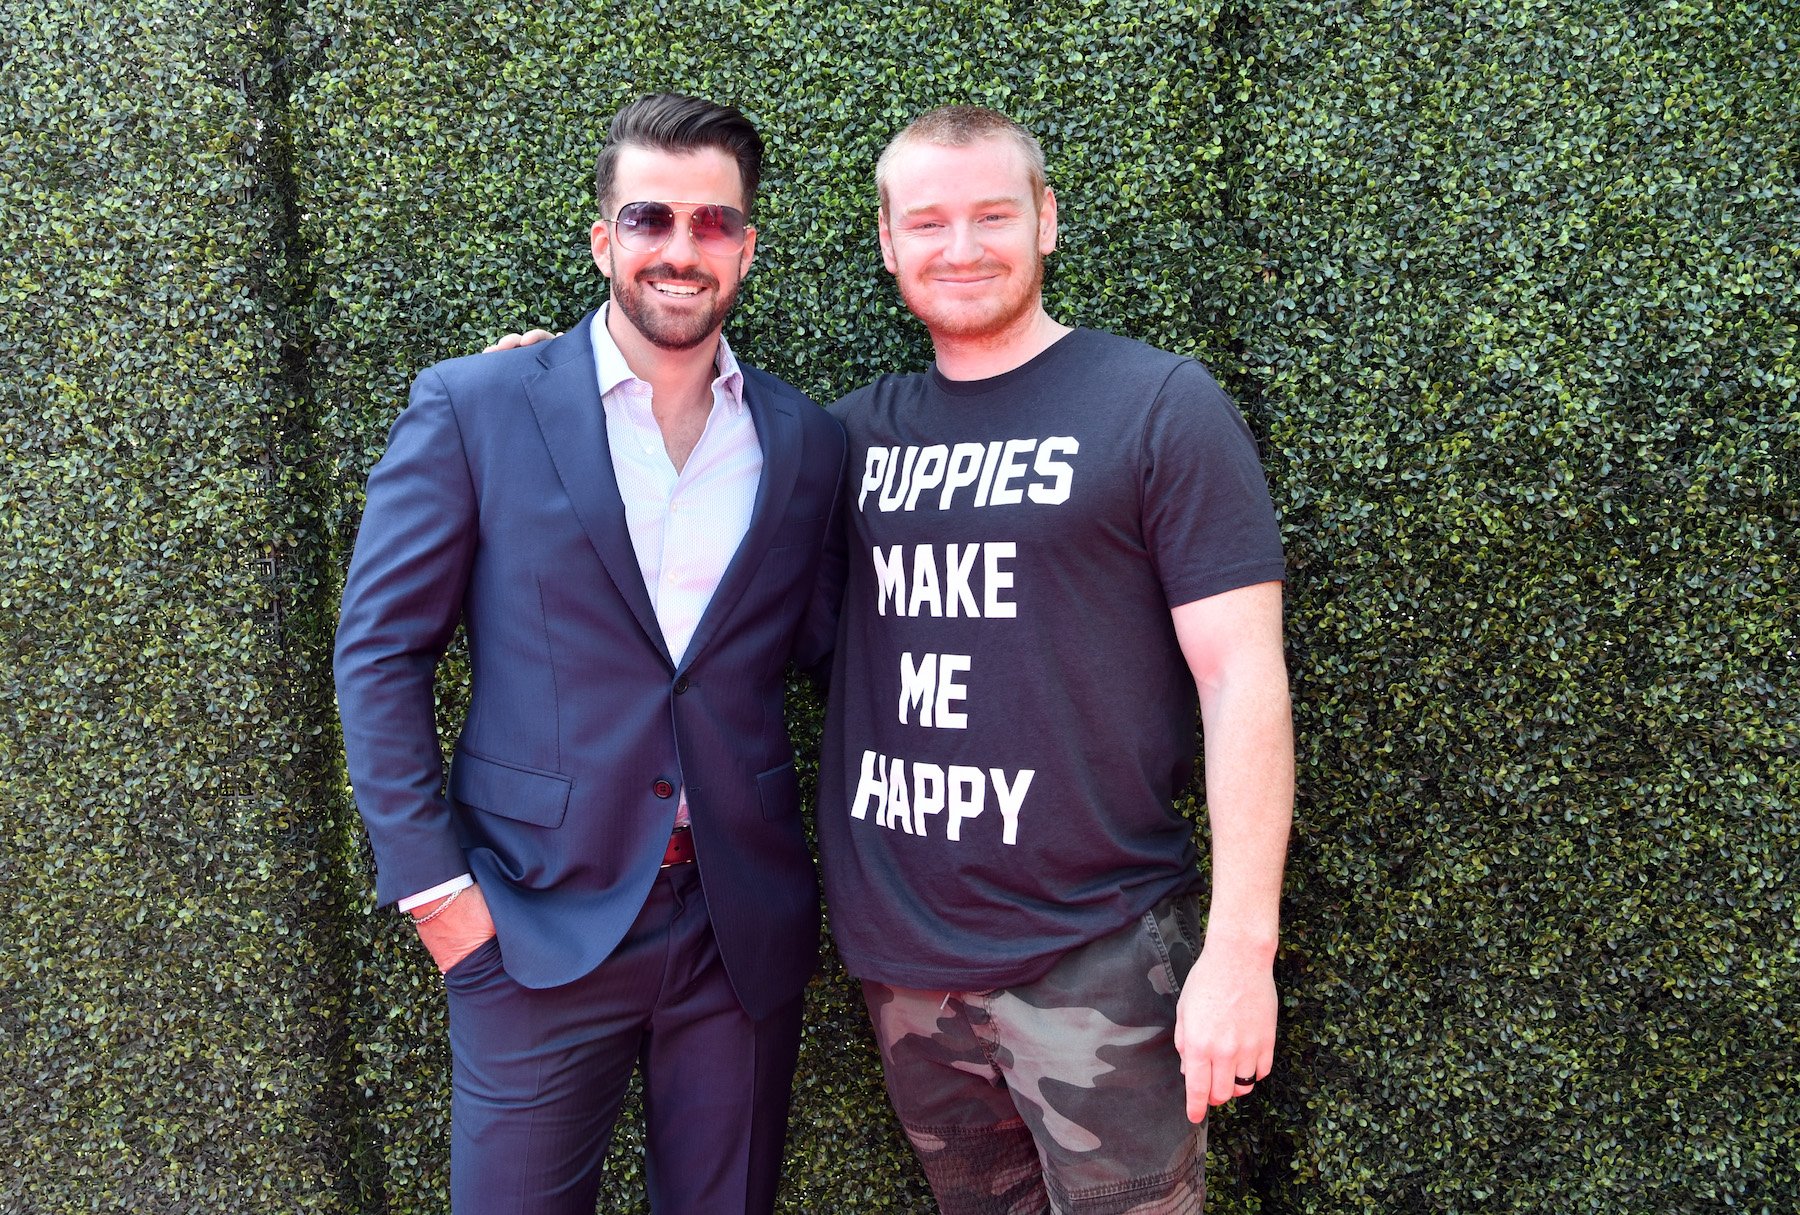 Johnny 'Bananas' Devenanzio and Wes Bergmann from MTV's 'The Challenge' standing with their arms around each other at an event